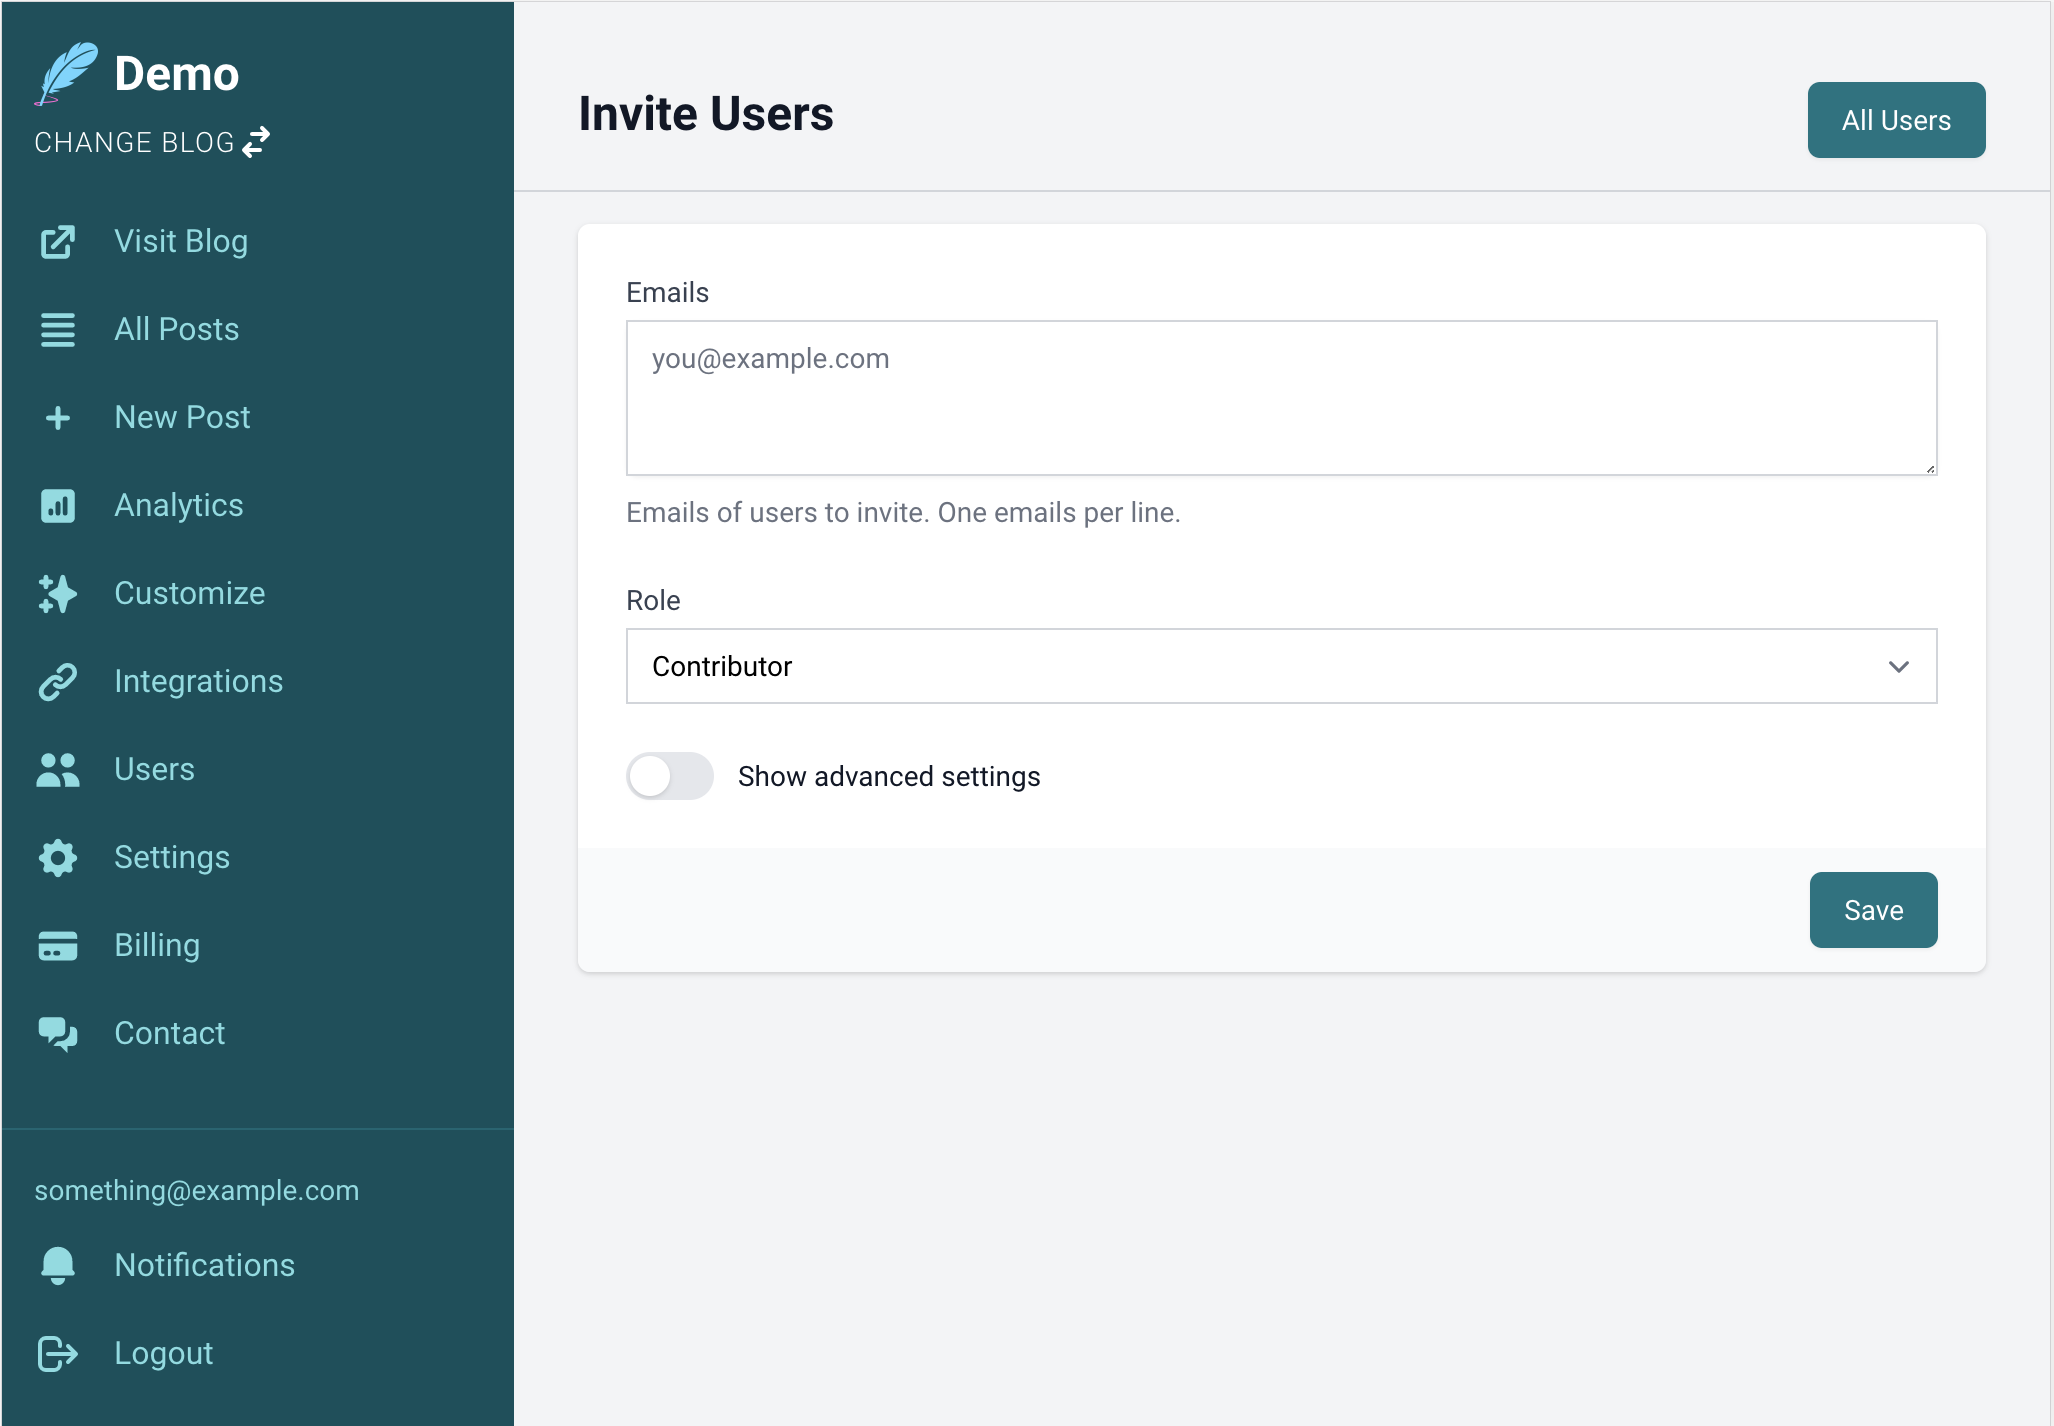 Invite Users Page